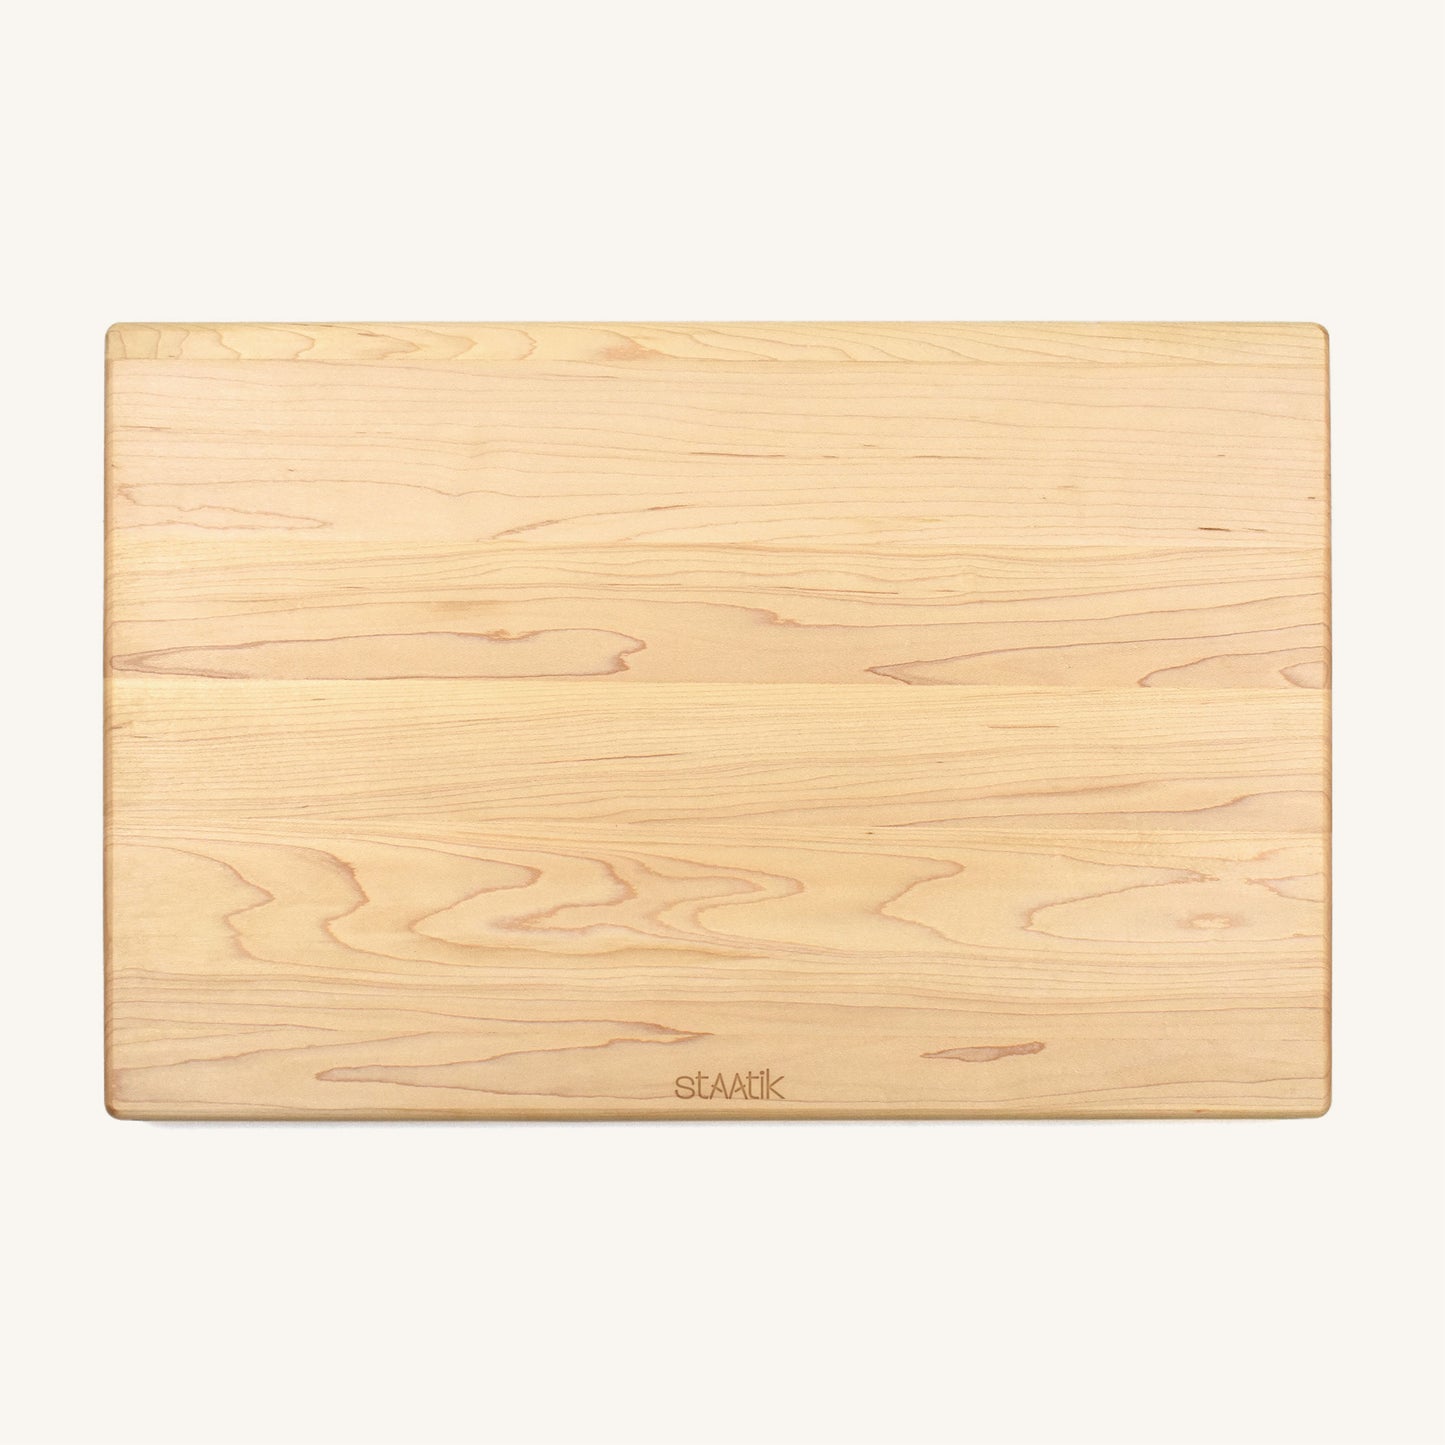 Thick Wood Cutting Board with Rounded Edges and Juice Groove